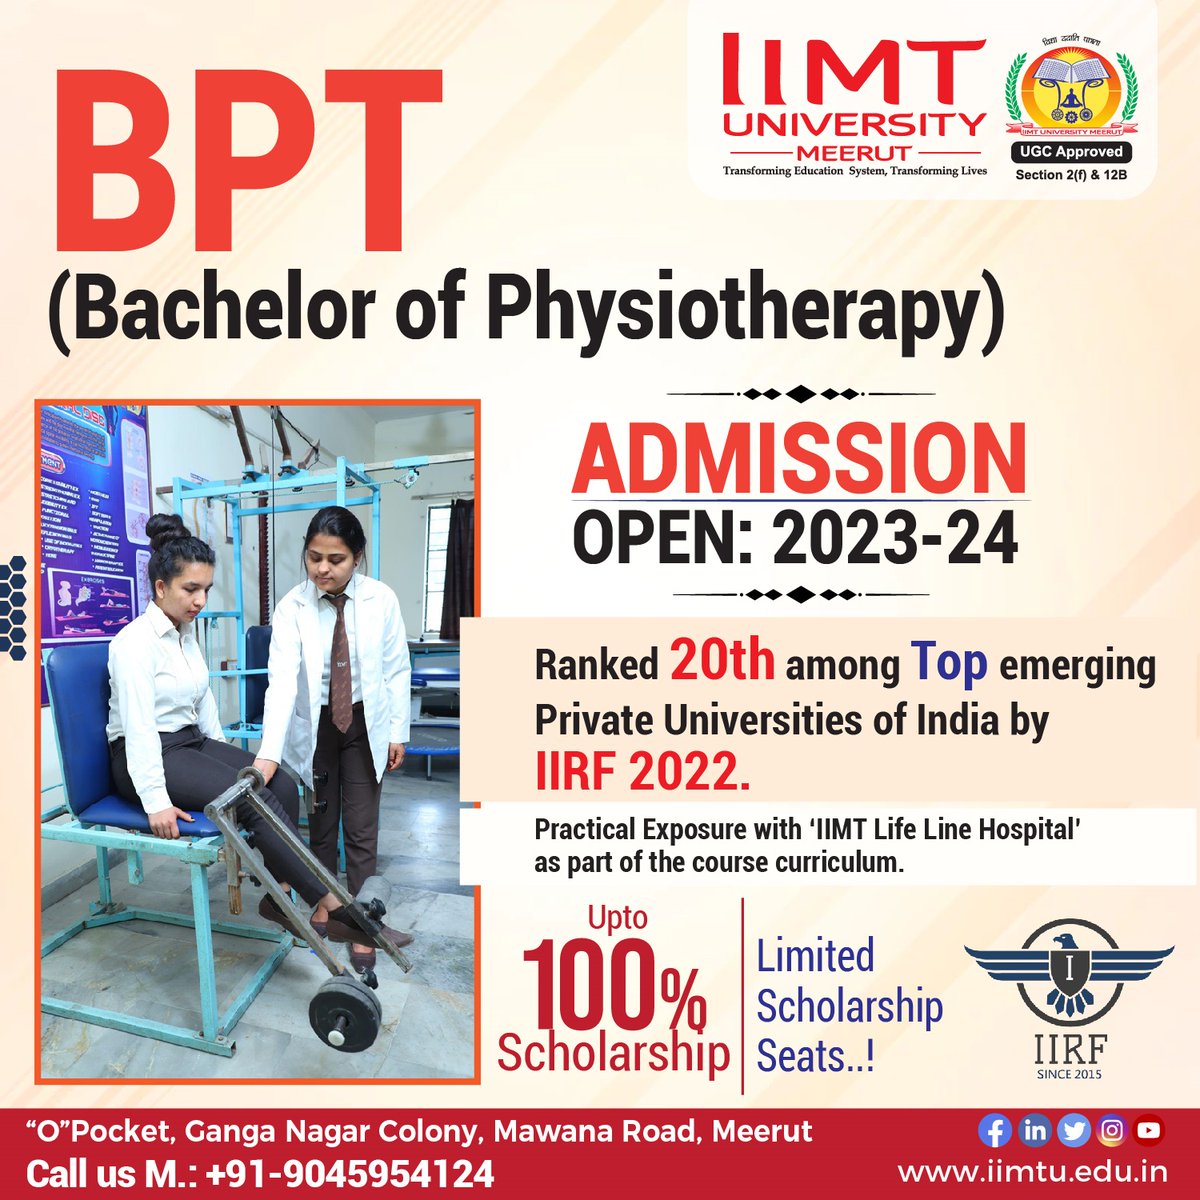 Admissions Open in B. P. T. for the session 2023-24

#AdmissionsOpen2023 #BPTAdmissions #Physiotherapy

iimtu.edu.in | Helpline +91-9045954124

#IIMTU #AdmissionsOpen #UniversityAdmissions
#IIMTMeerut #CollegeAdmissions #UGCourses #PGCourses #DegreeCourses #PhDPrograms